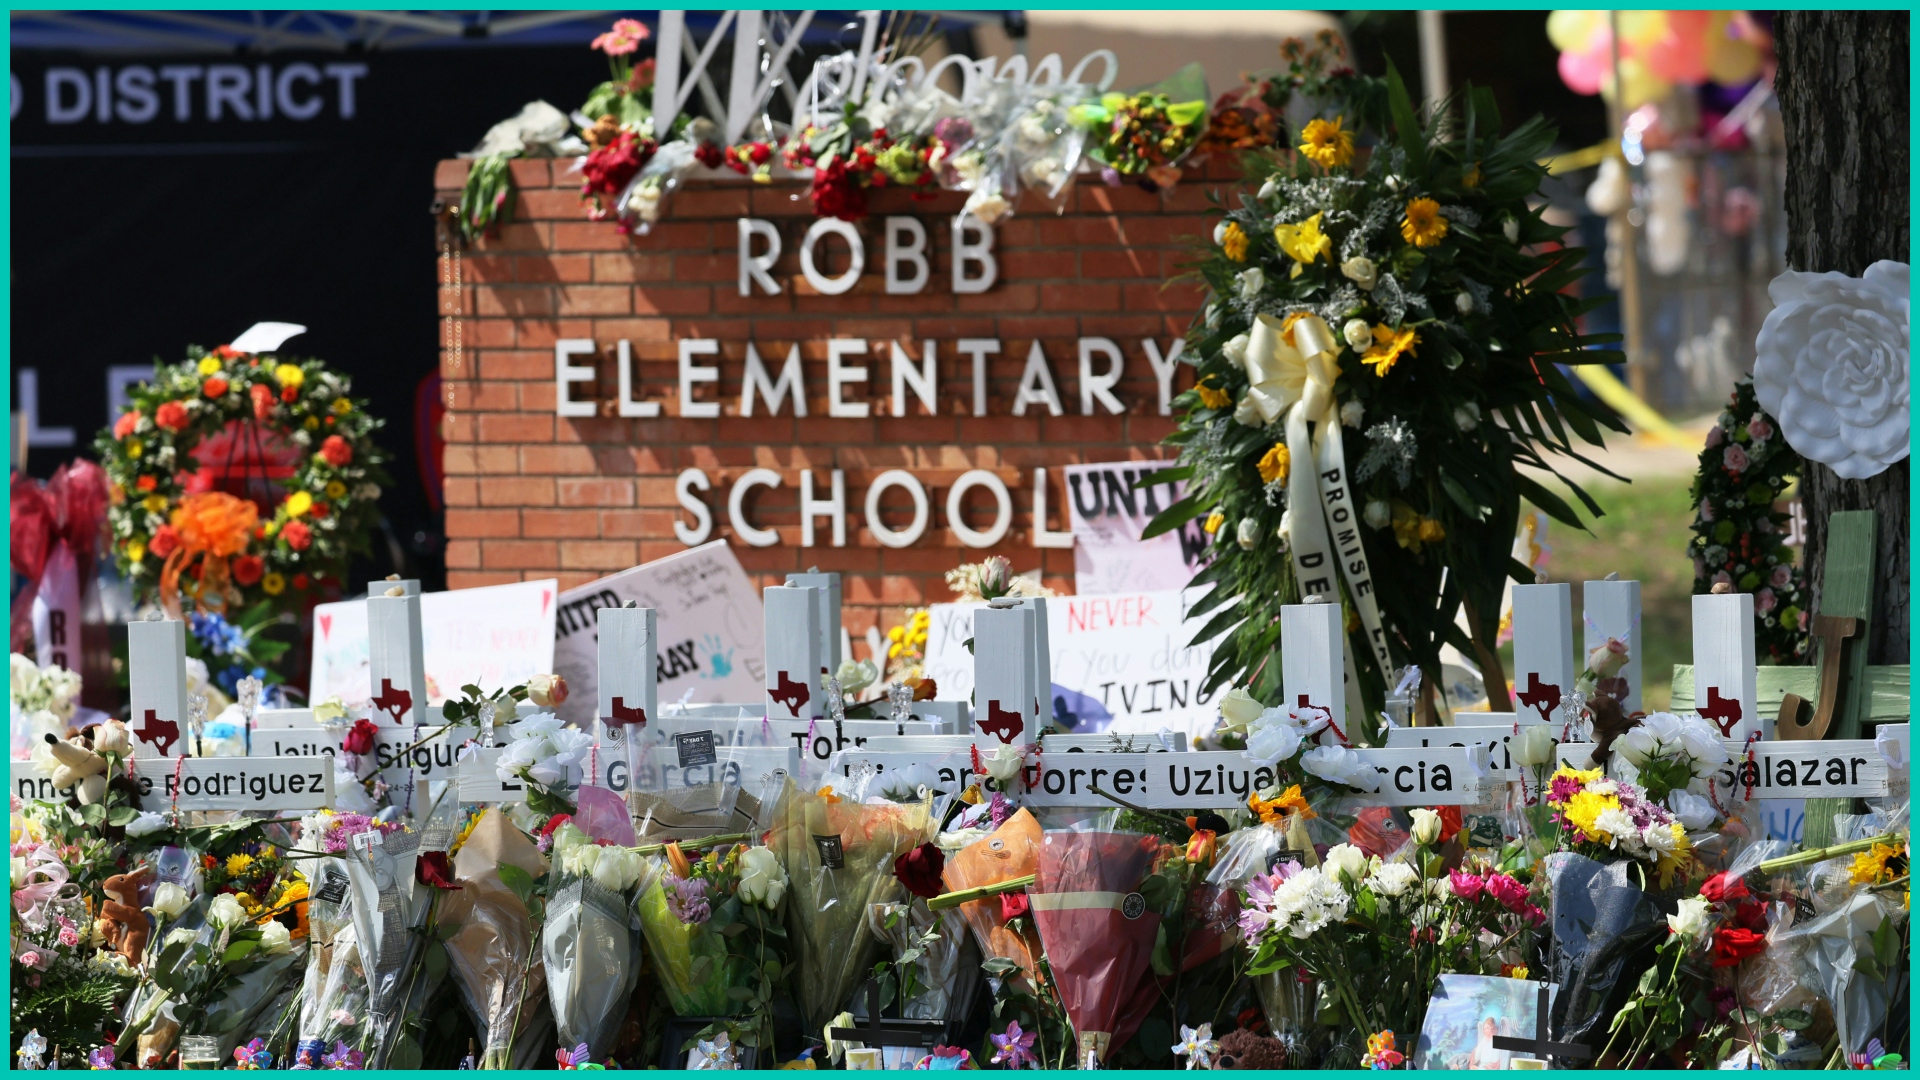 A memorial for the victim's of Tuesday's mass shooting at Robb Elementary School is seen on May 27, 2022 in Uvalde, Texas.